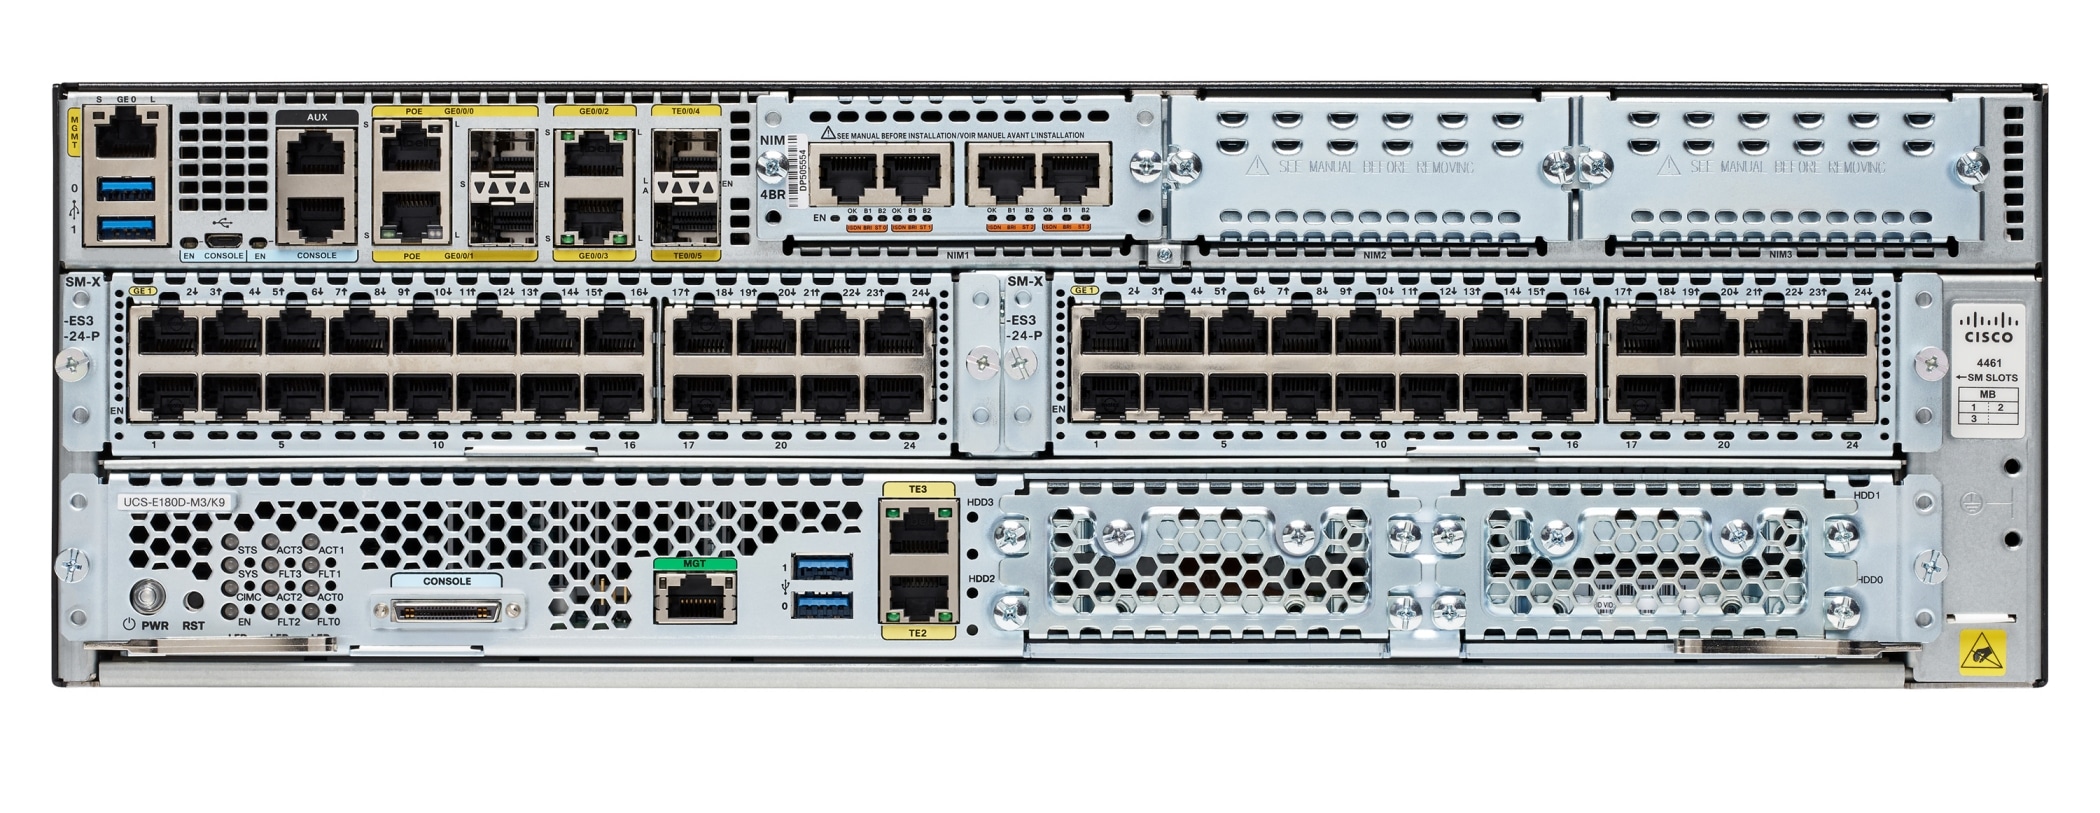 Family image of Cisco 4000 Series Integrated Services Routers